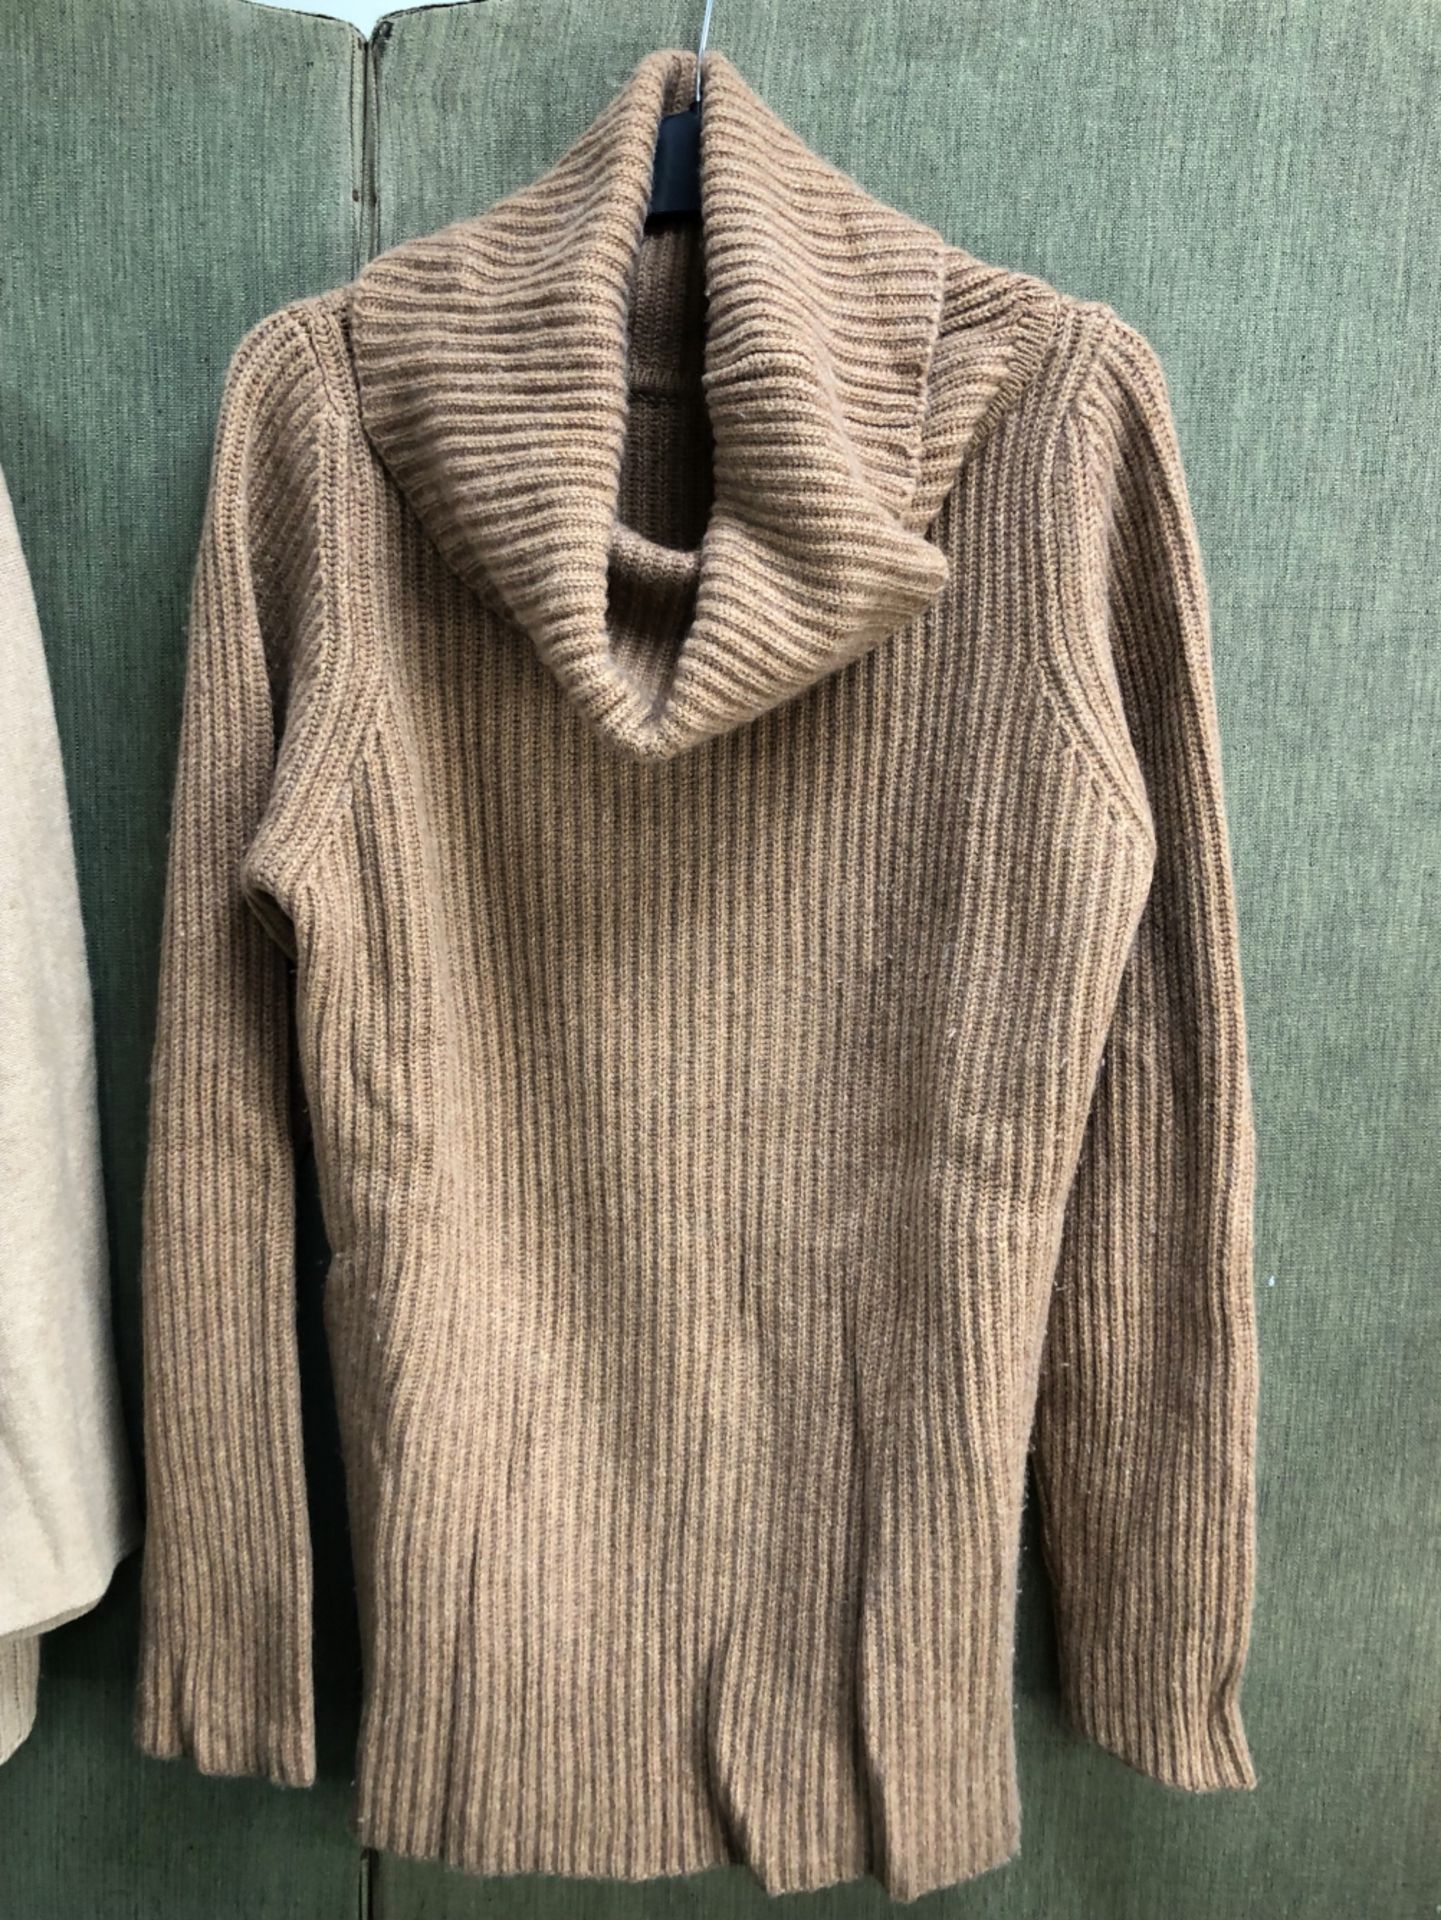 A JOHNSTONS CASHMERE 44" CABLE KNIT CARDIGAN, A KNITTED CARDIGAN WITH NECK TIE, A TSE CASHMERE - Image 10 of 16